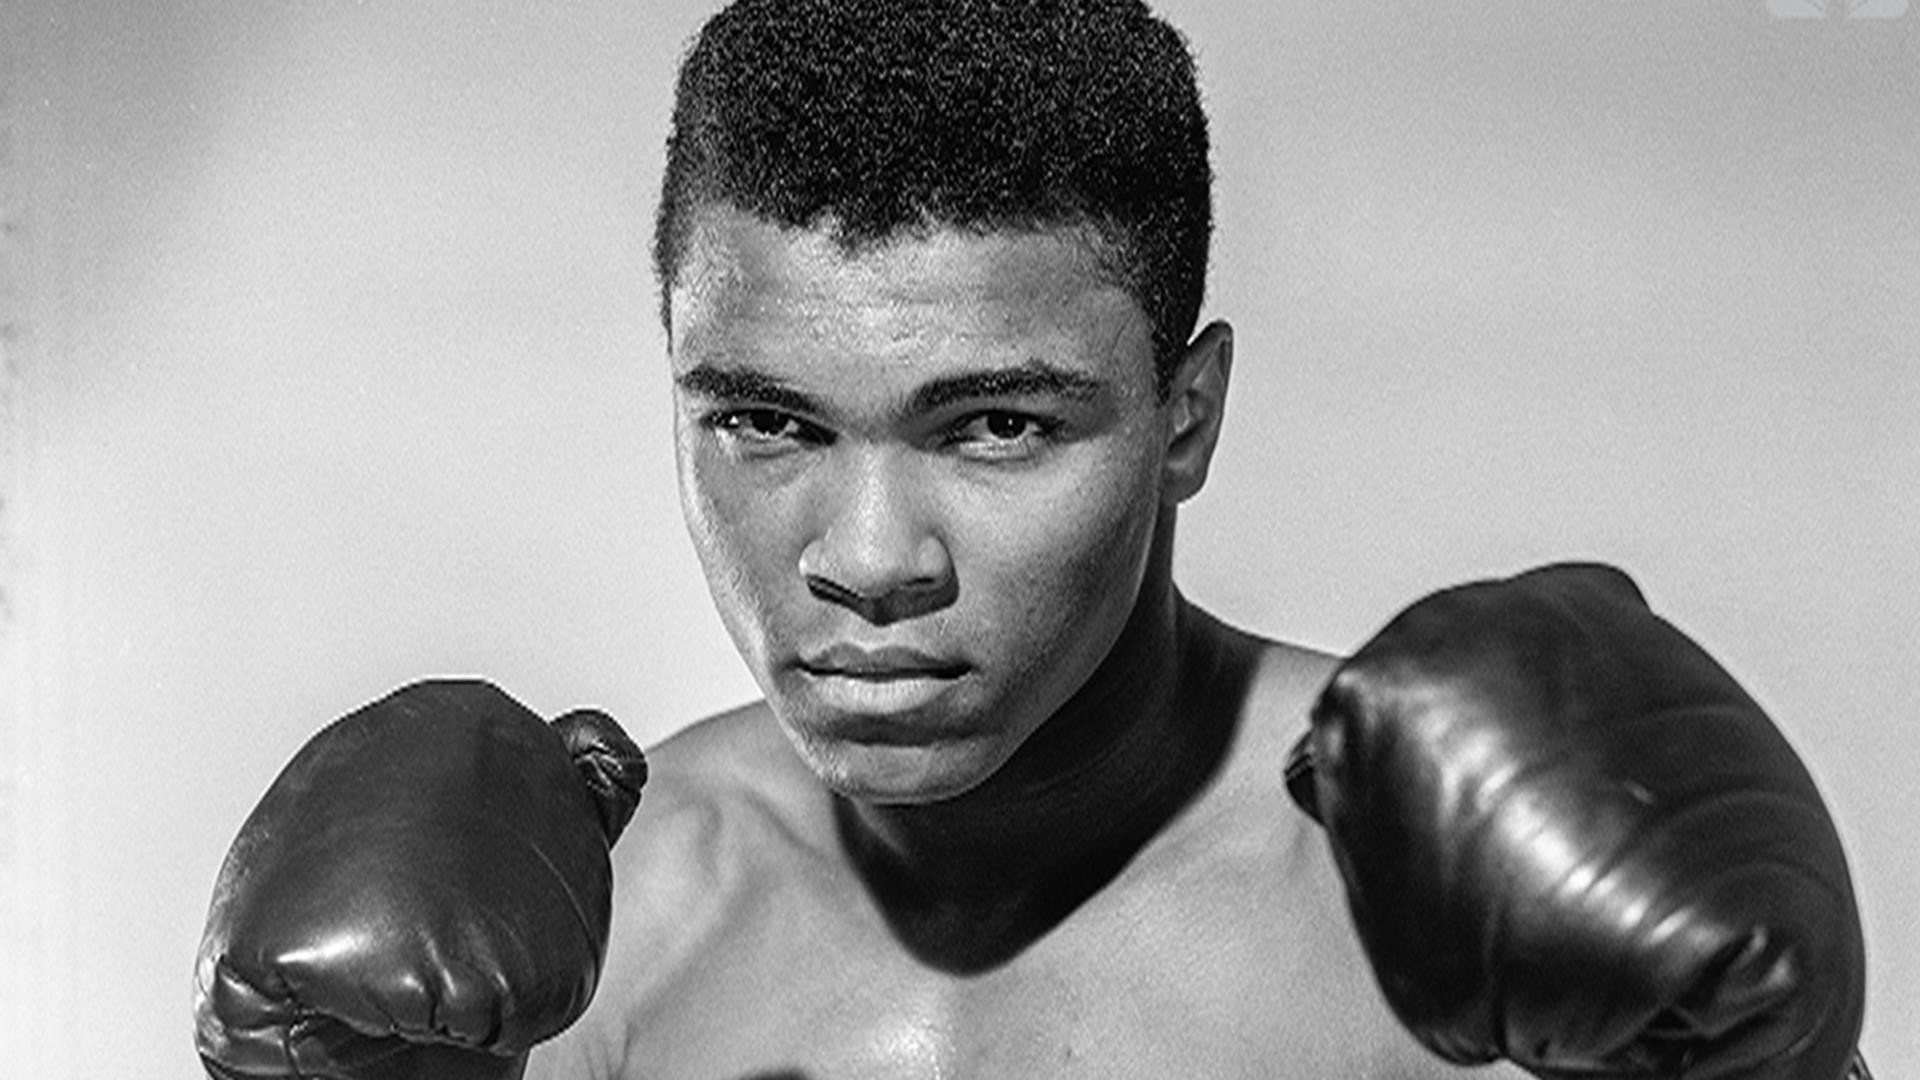 1920x1080 Muhammad Ali Wallpapers Images Photos Pictures Backgrounds